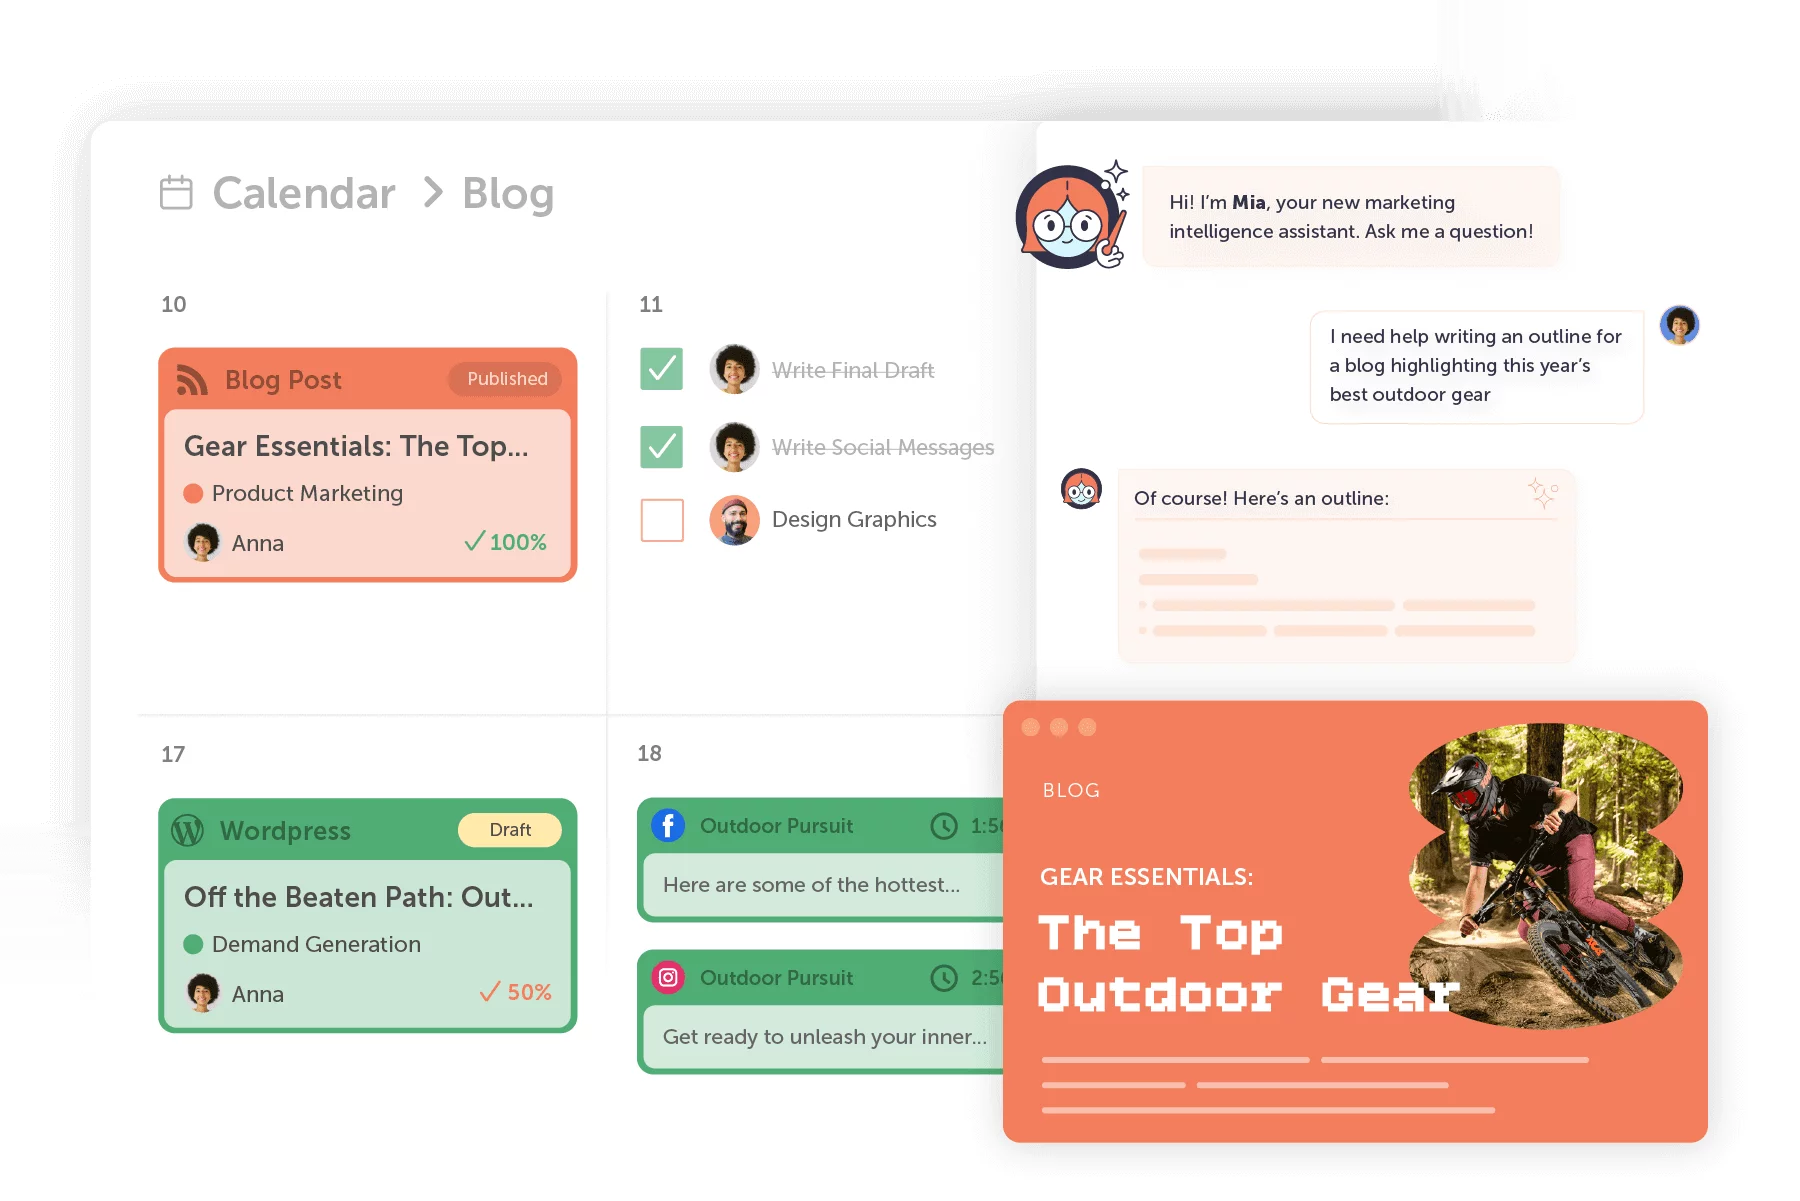 CoSchedule's calendar for blog and social media posts